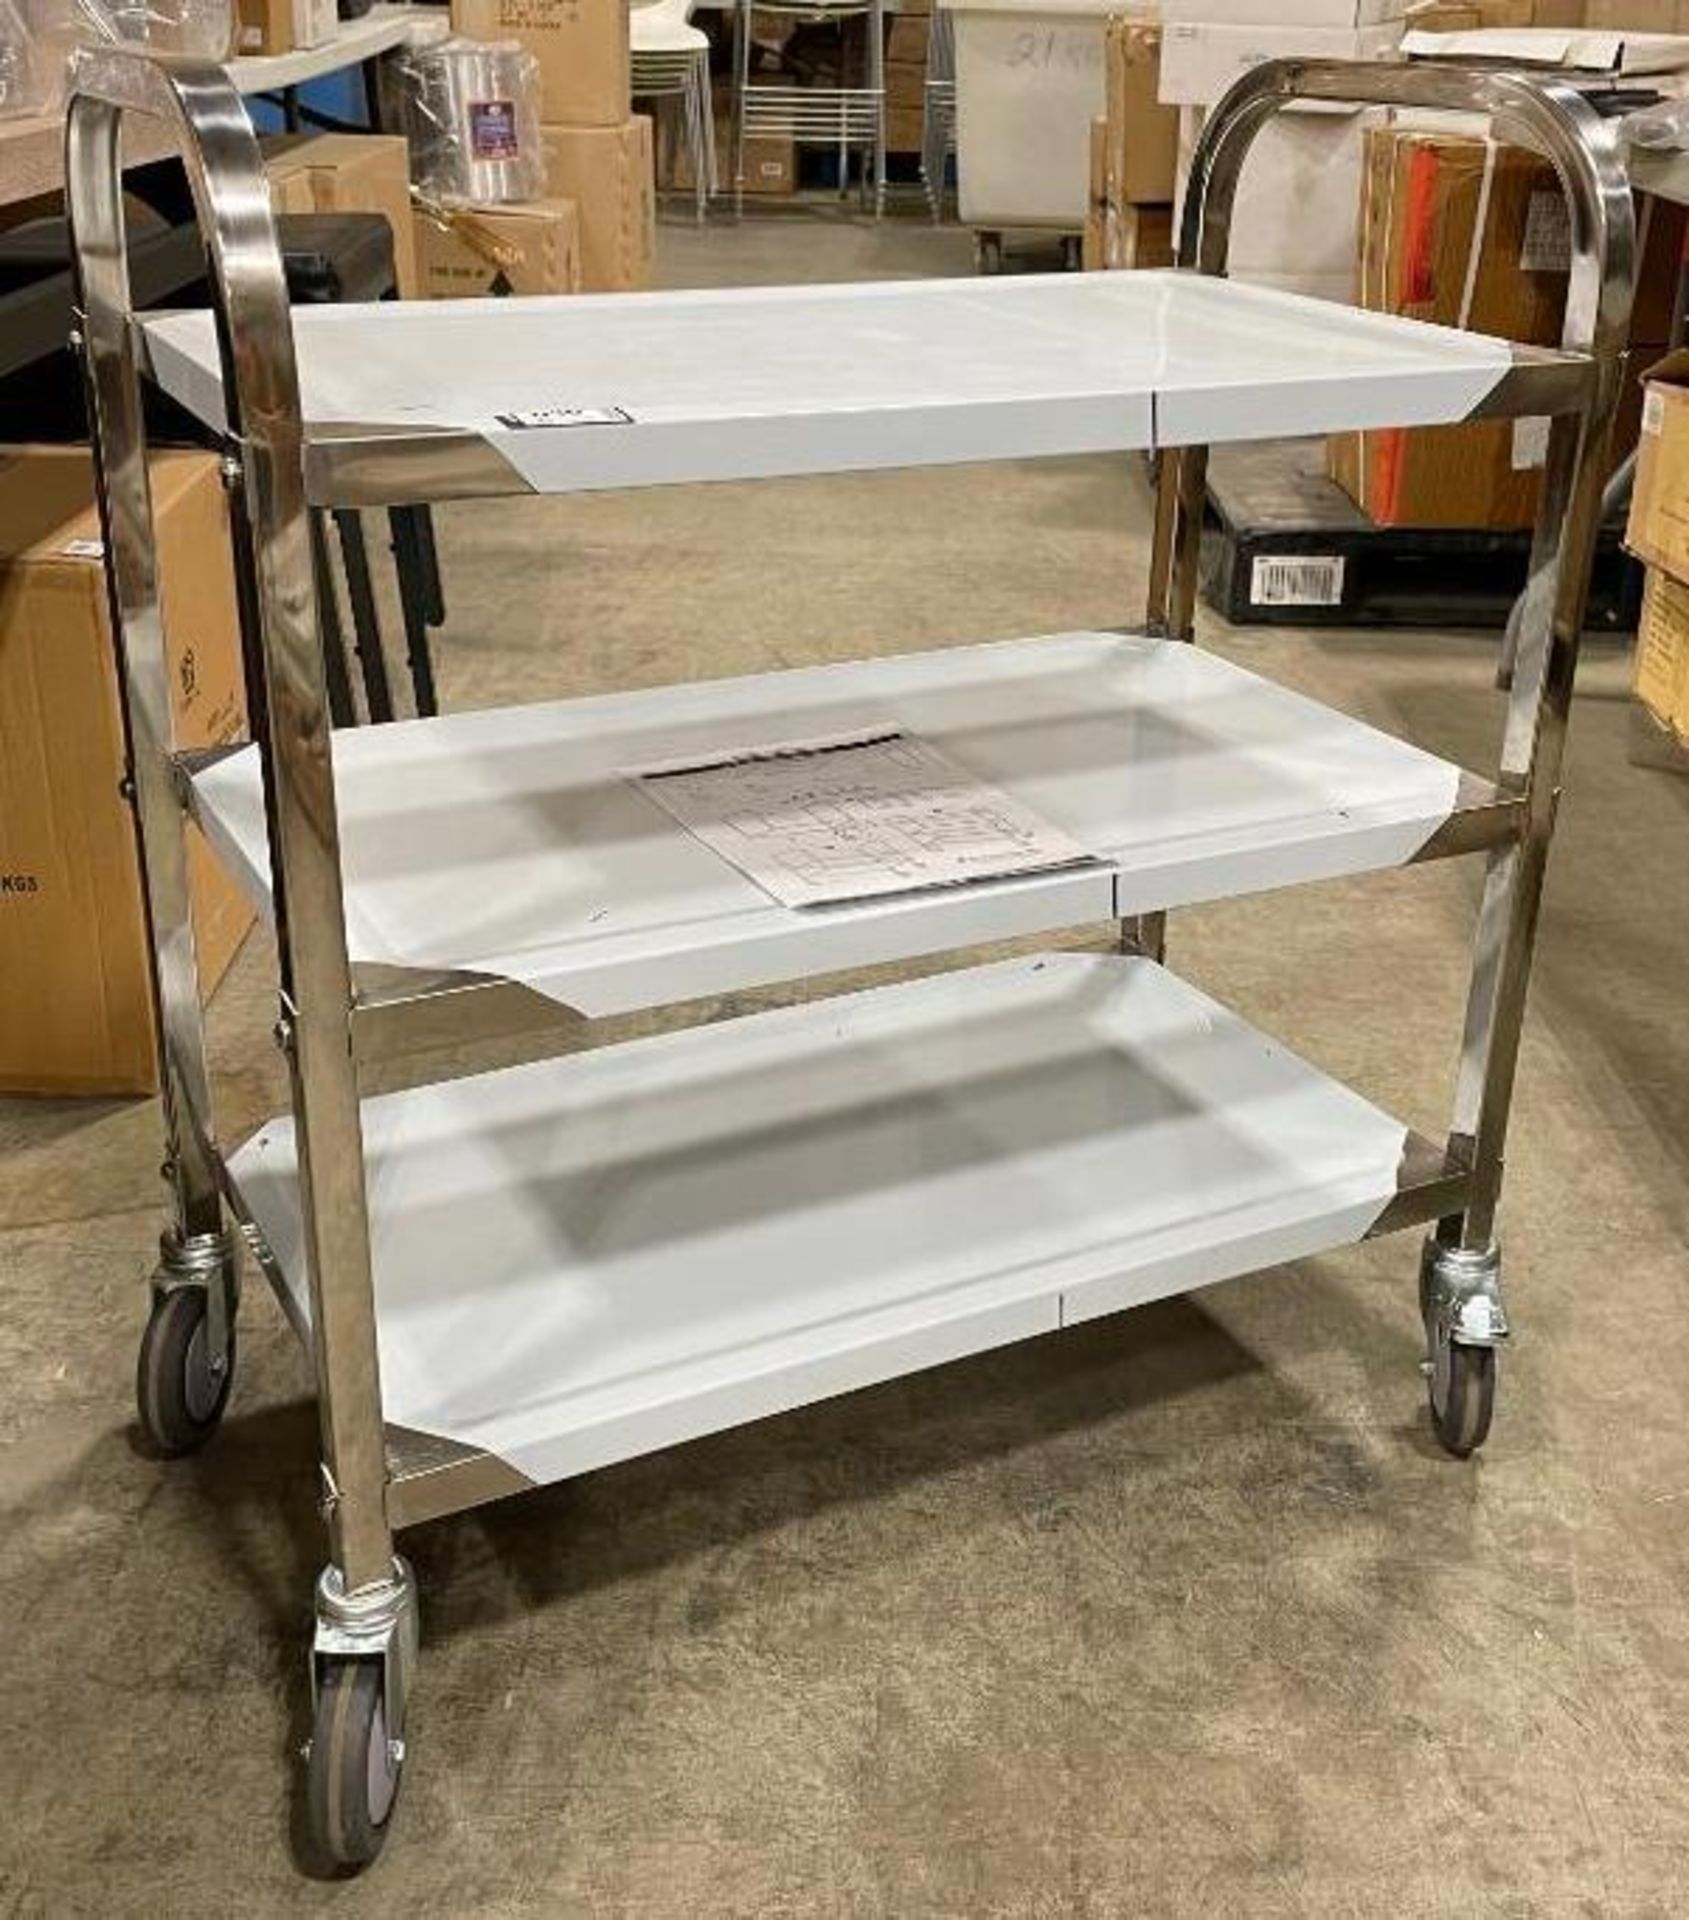 27" X 15" STAINLESS STEEL 3 TIER BUSSING CART - NEW - OMCAN 24418